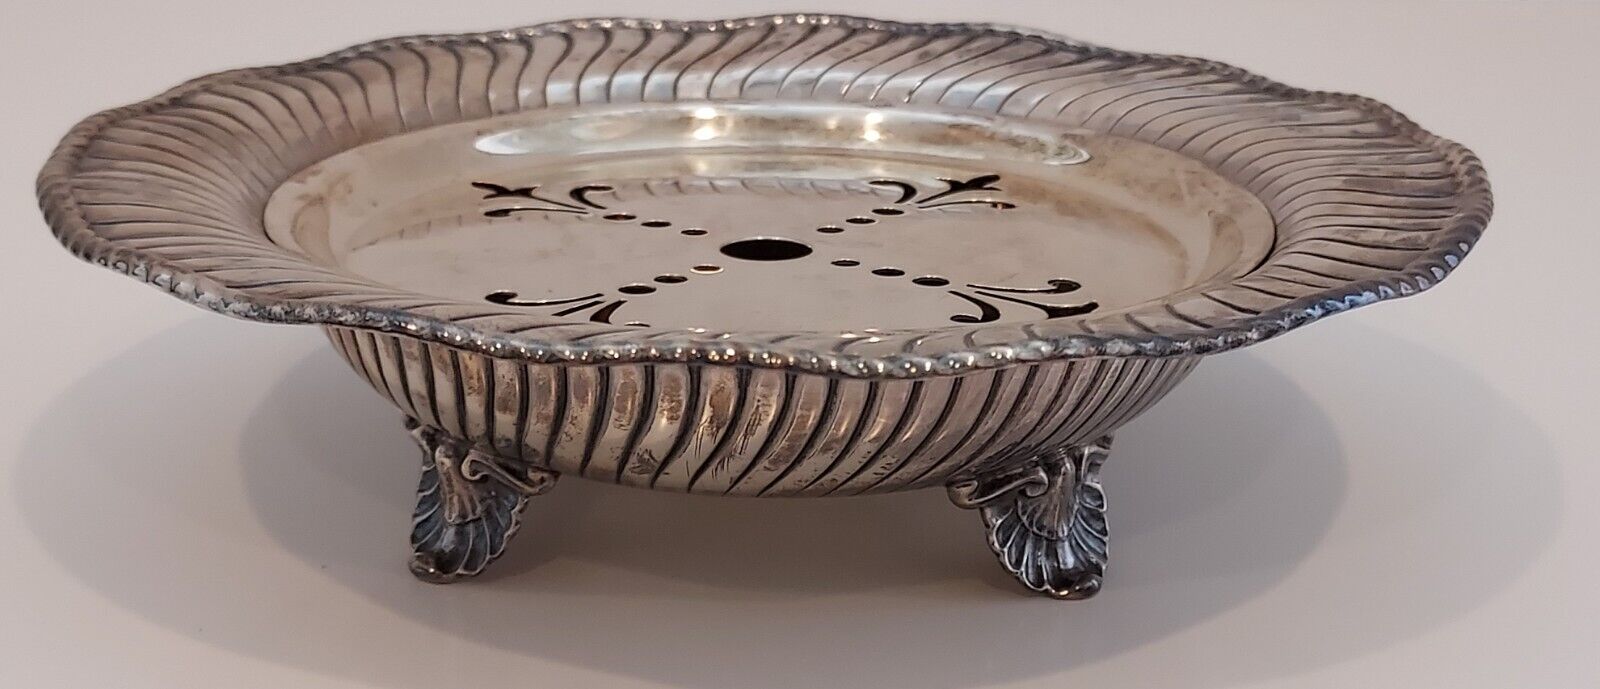 Dominick & Haff #1891/991s Sterling Silver Butter Dish With Insert